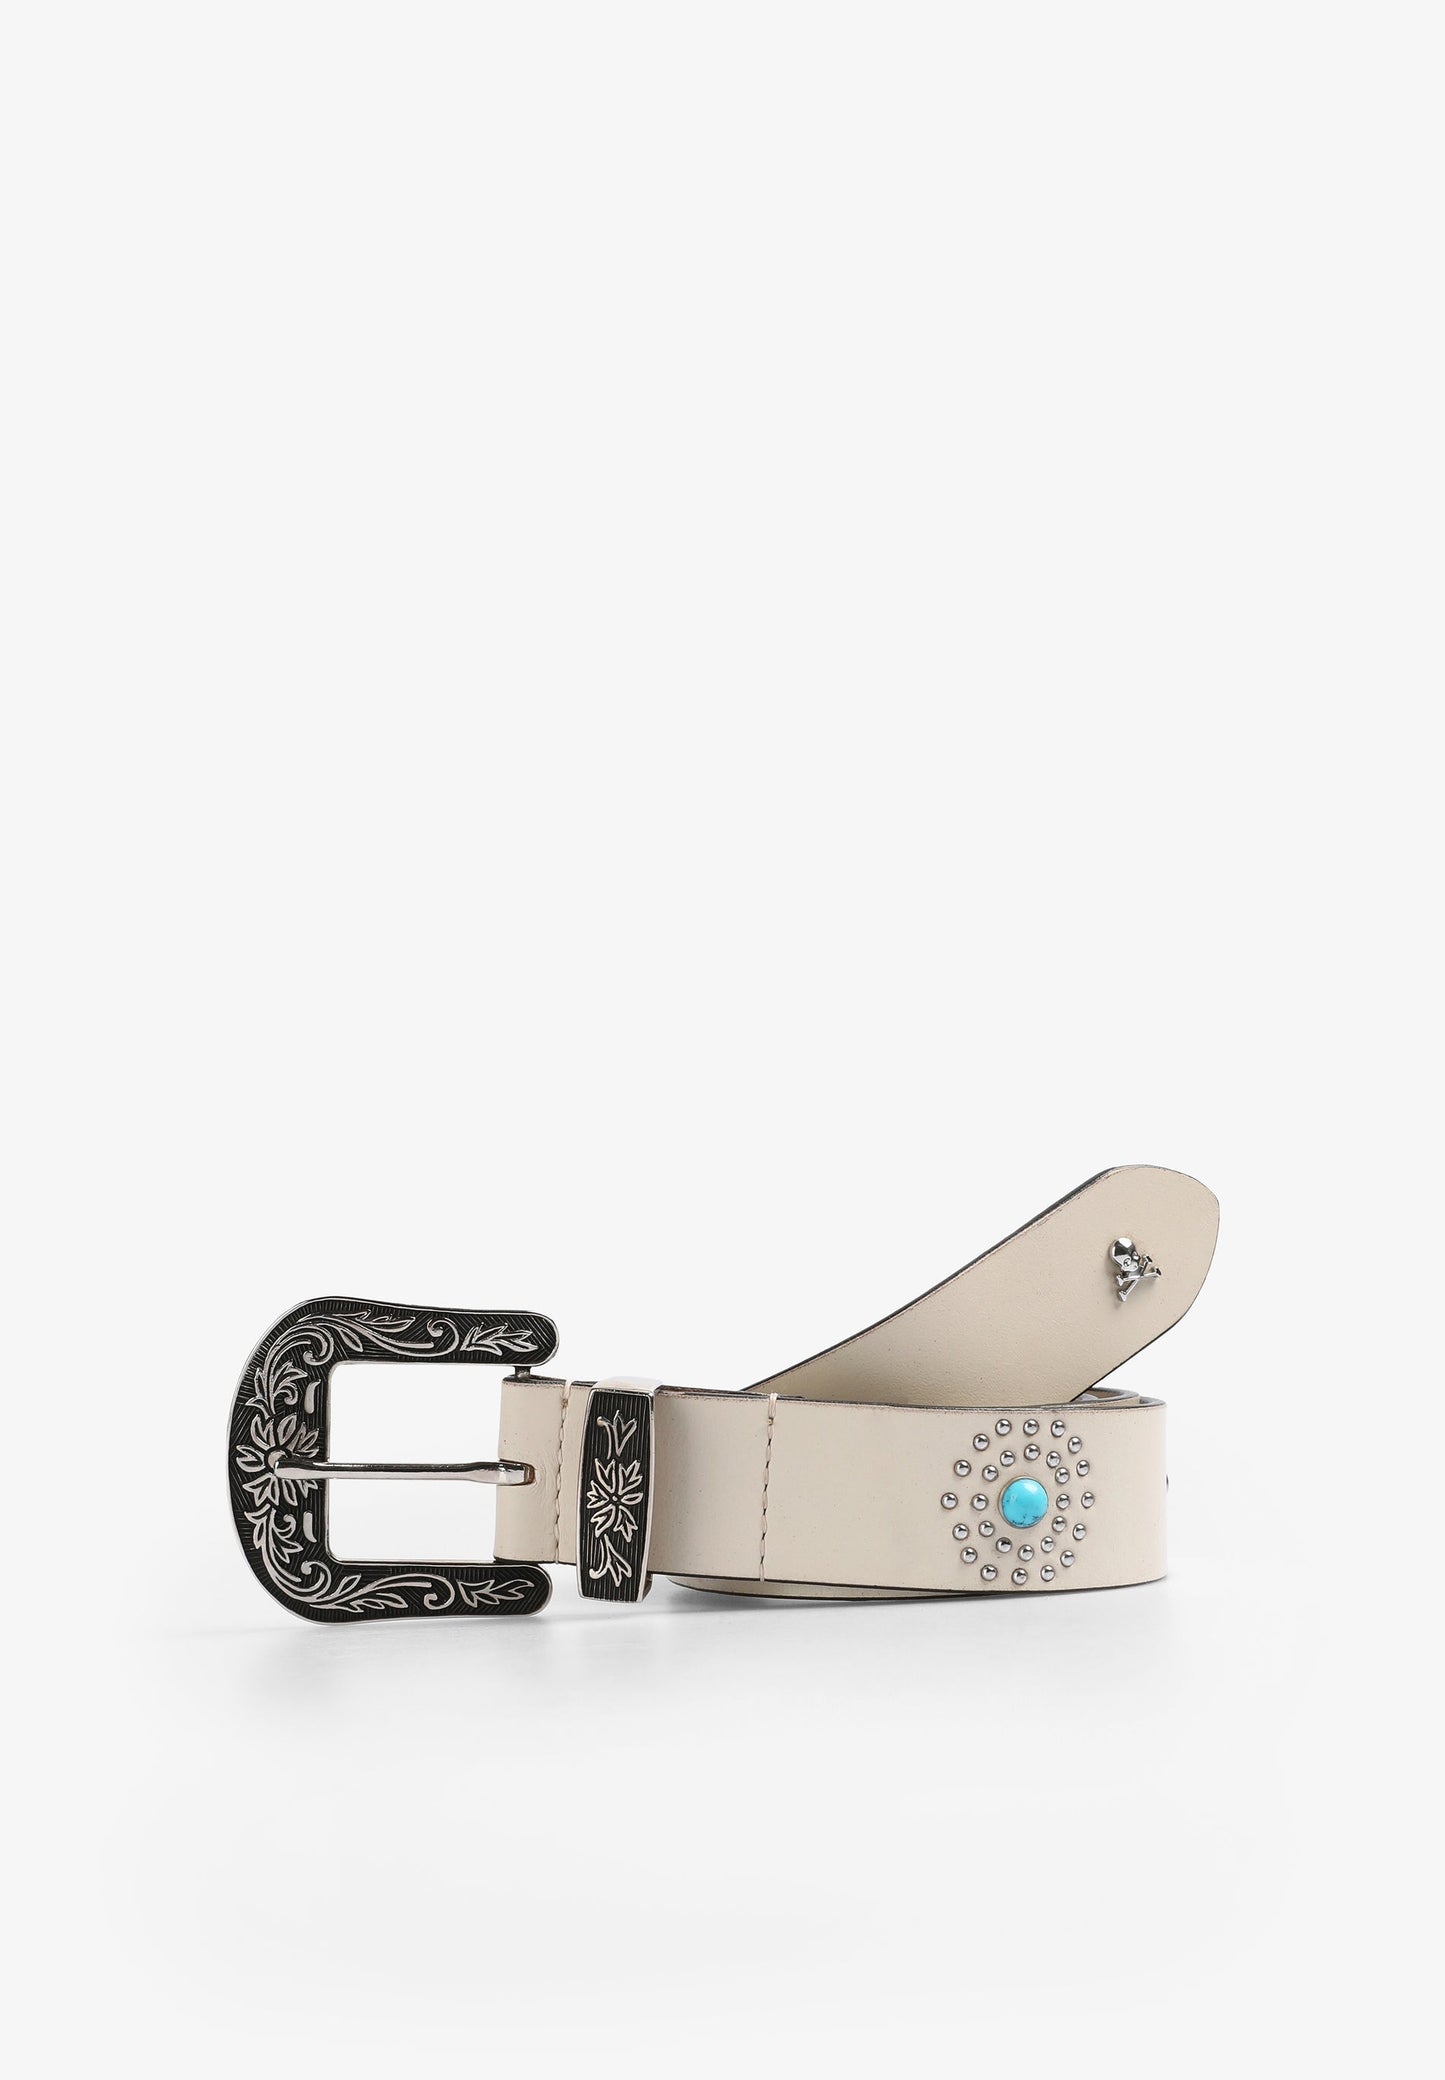 STUDDED LEATHER BELT WITH STONES DETAIL